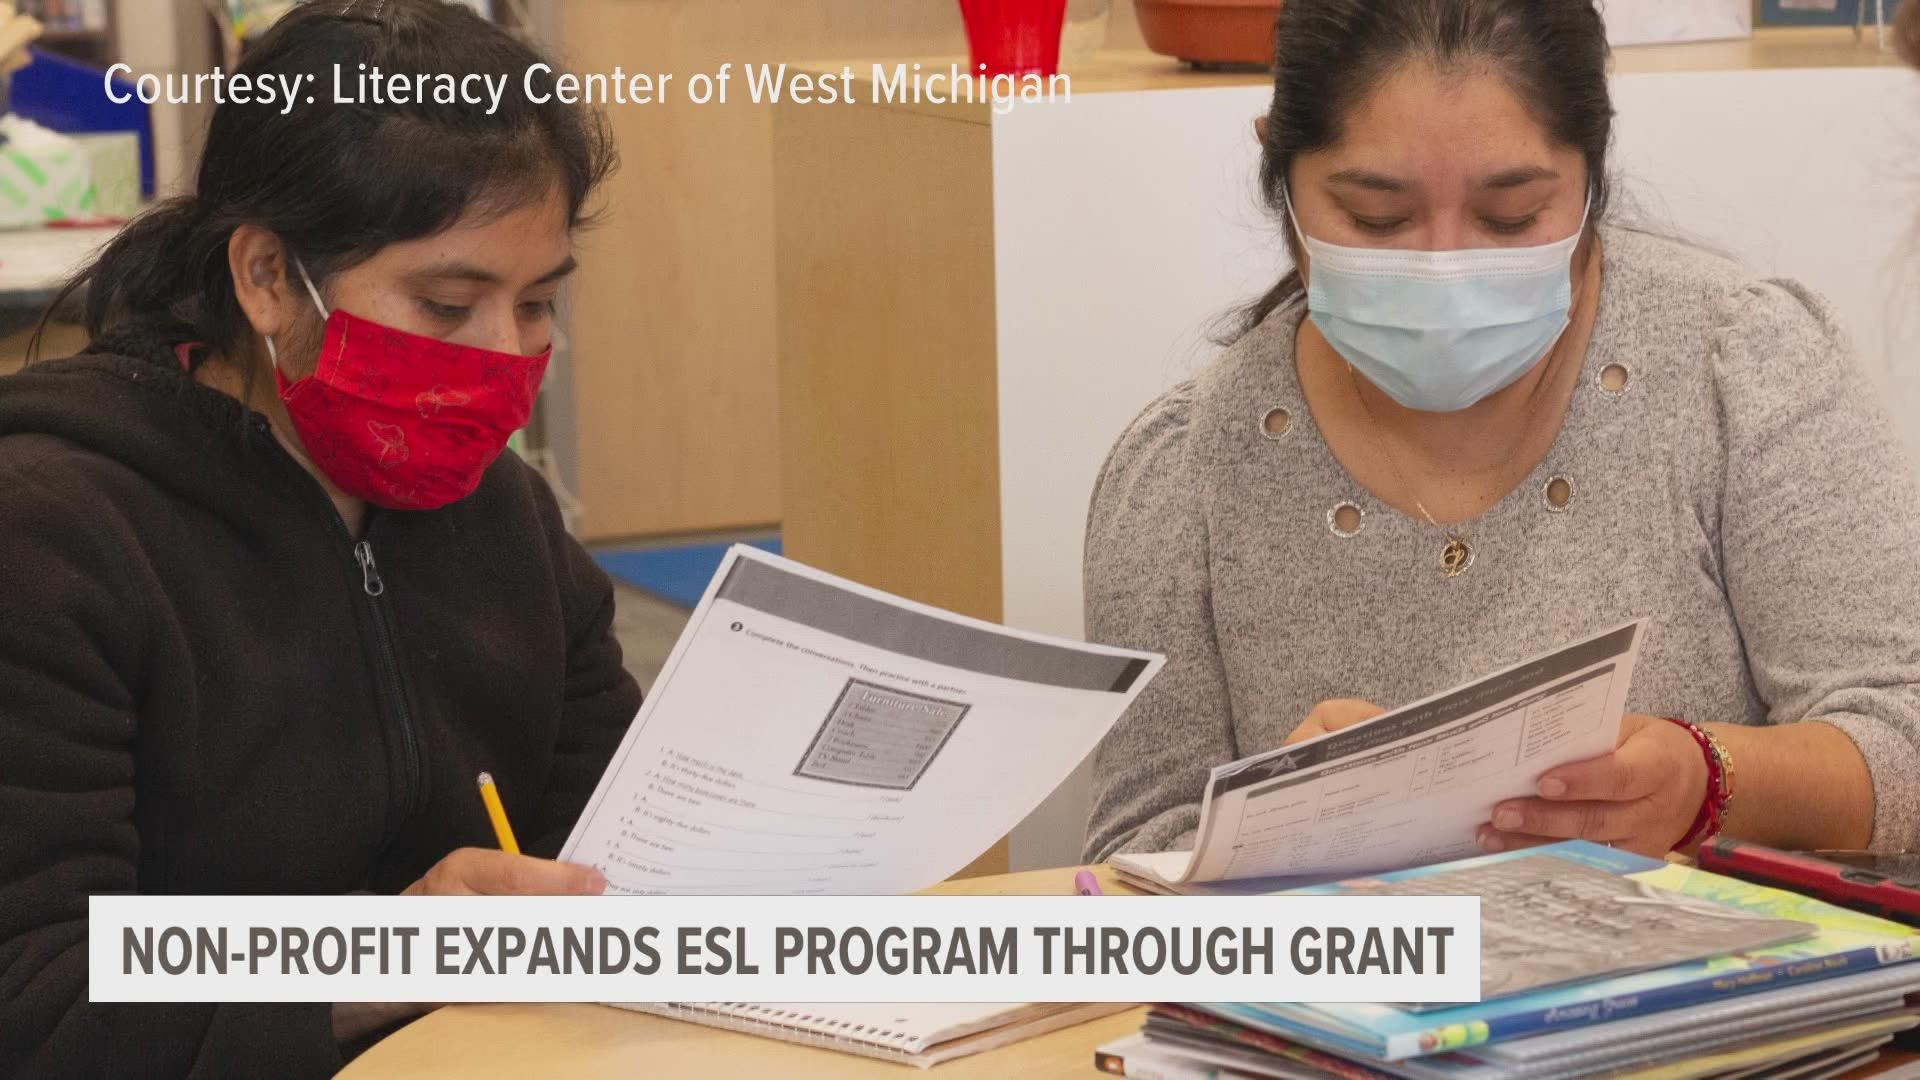 The Literacy Center of West Michigan is getting a boost to help twice as many immigrants learn English on their path to citizenship.